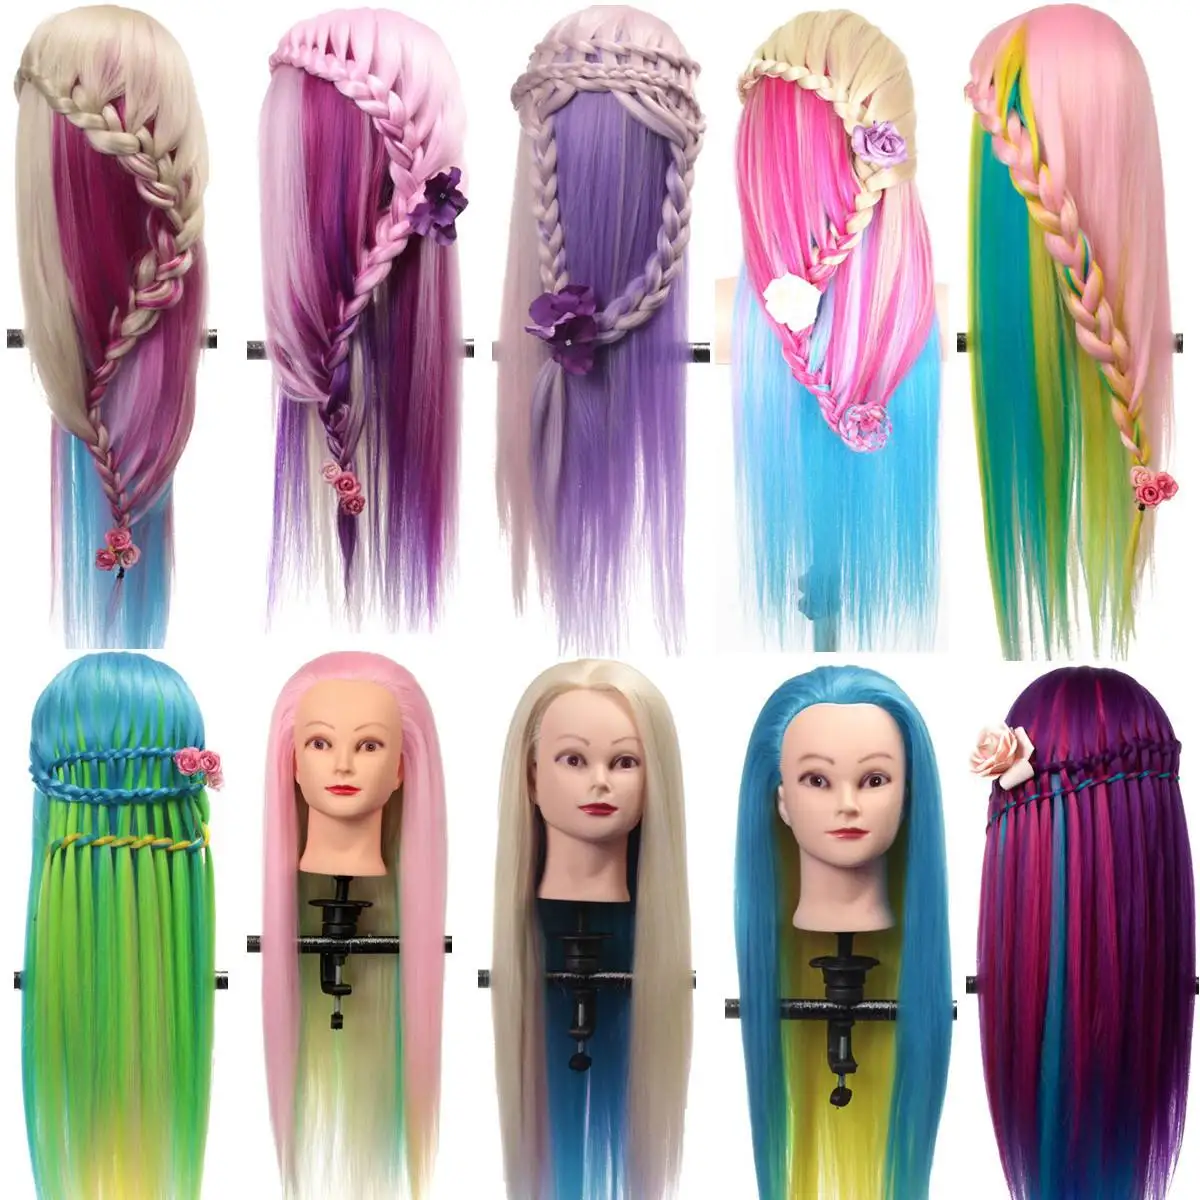 27 inch Professional Salon Practice Head Colorful High Temperature Fiber Hair Model Hairdressing Mannequin With Clamp Holder New